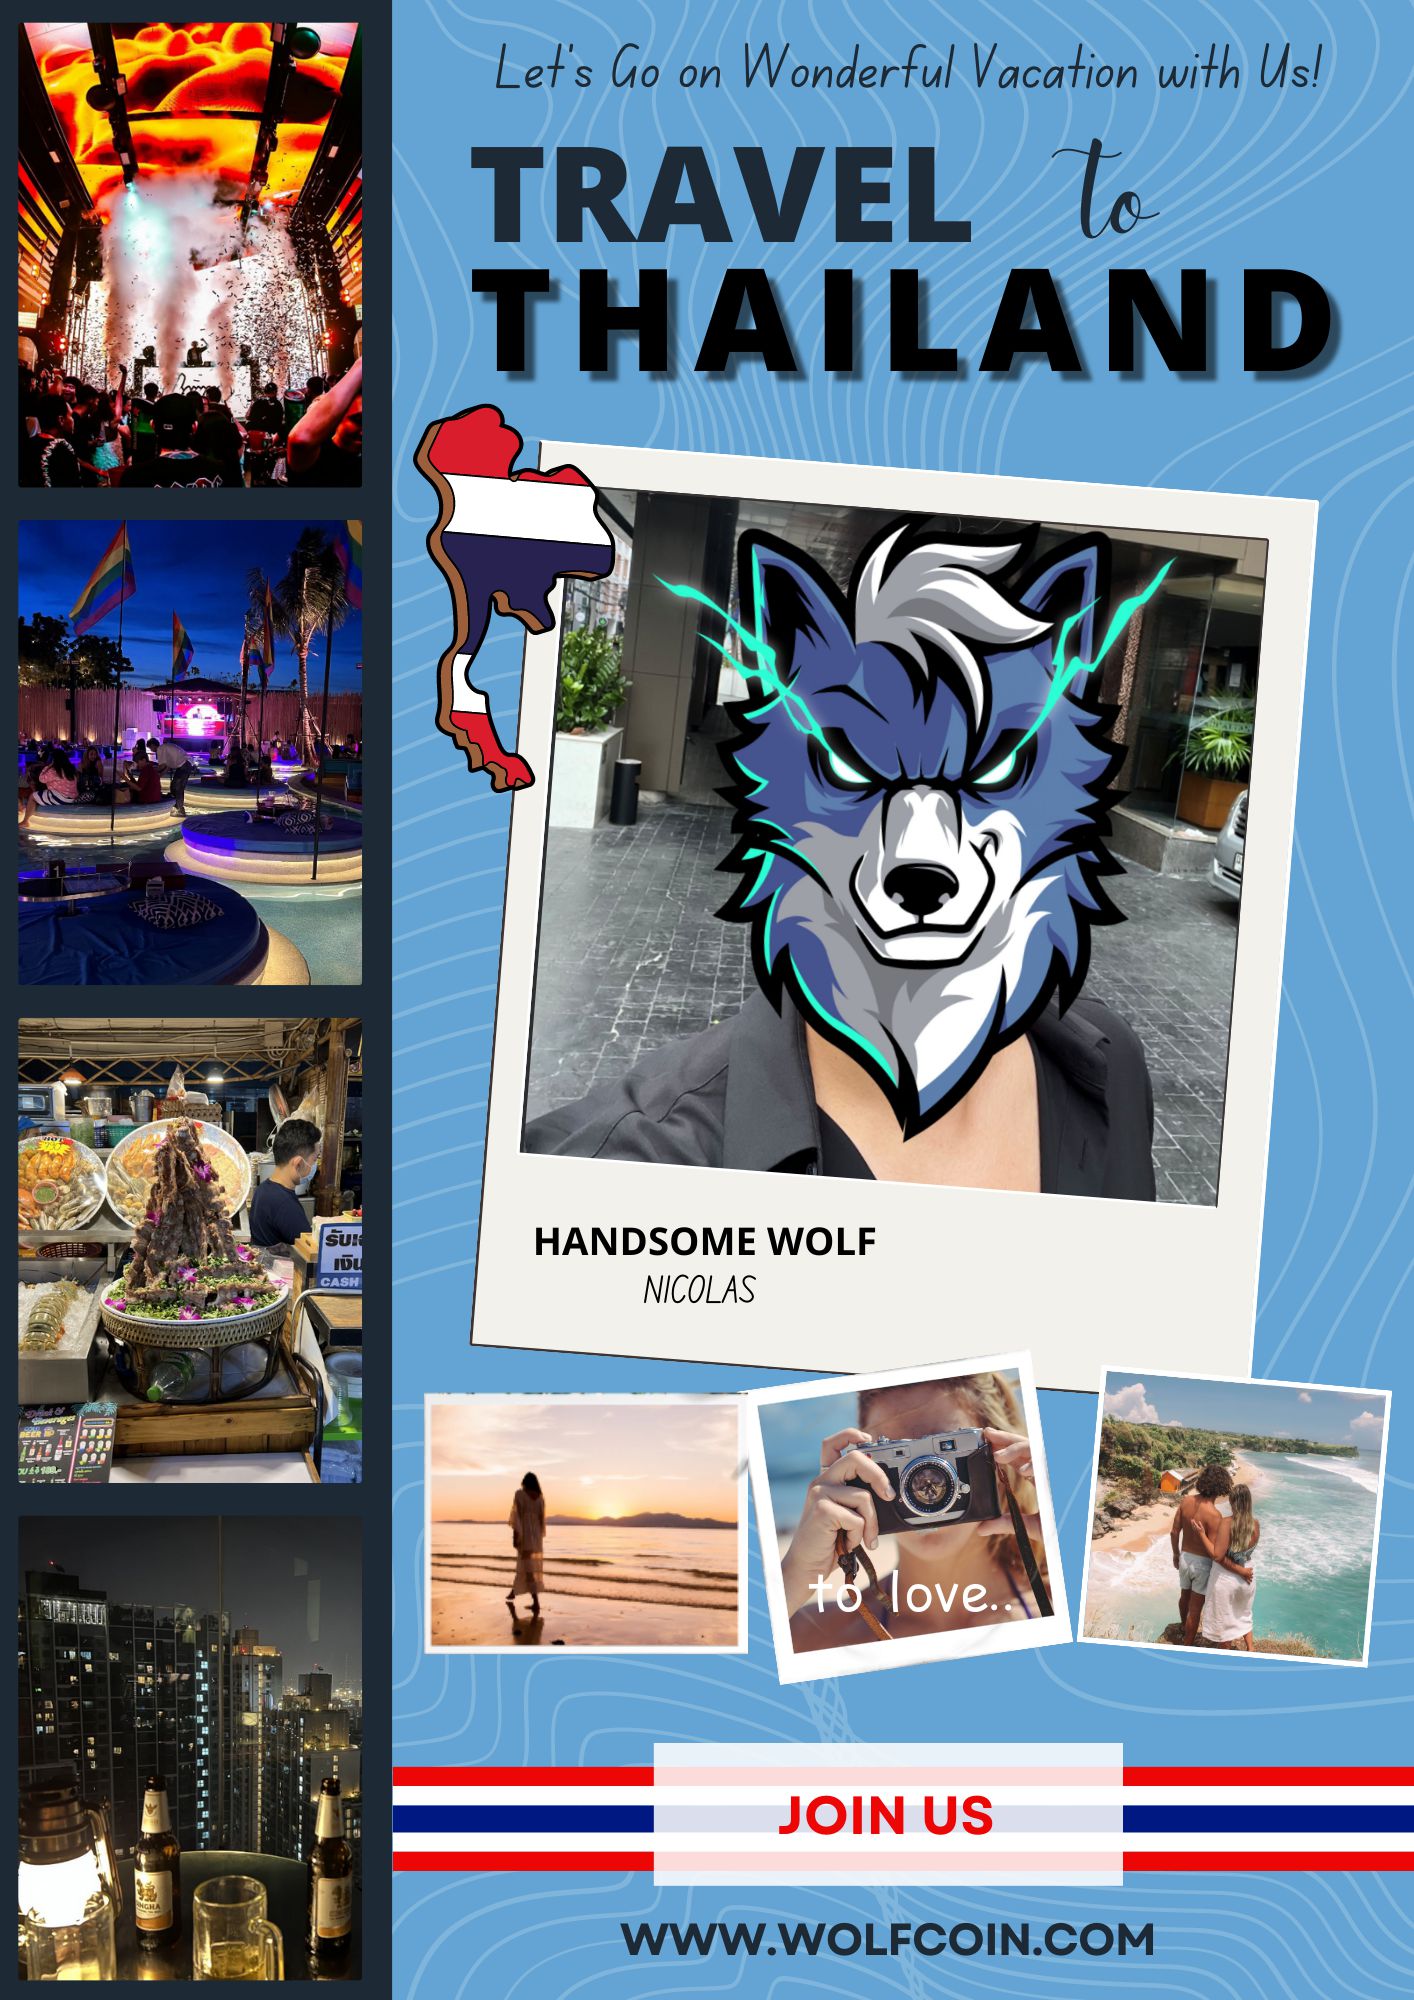 Travel to Thailand (WOLFCOIN).png.jpg